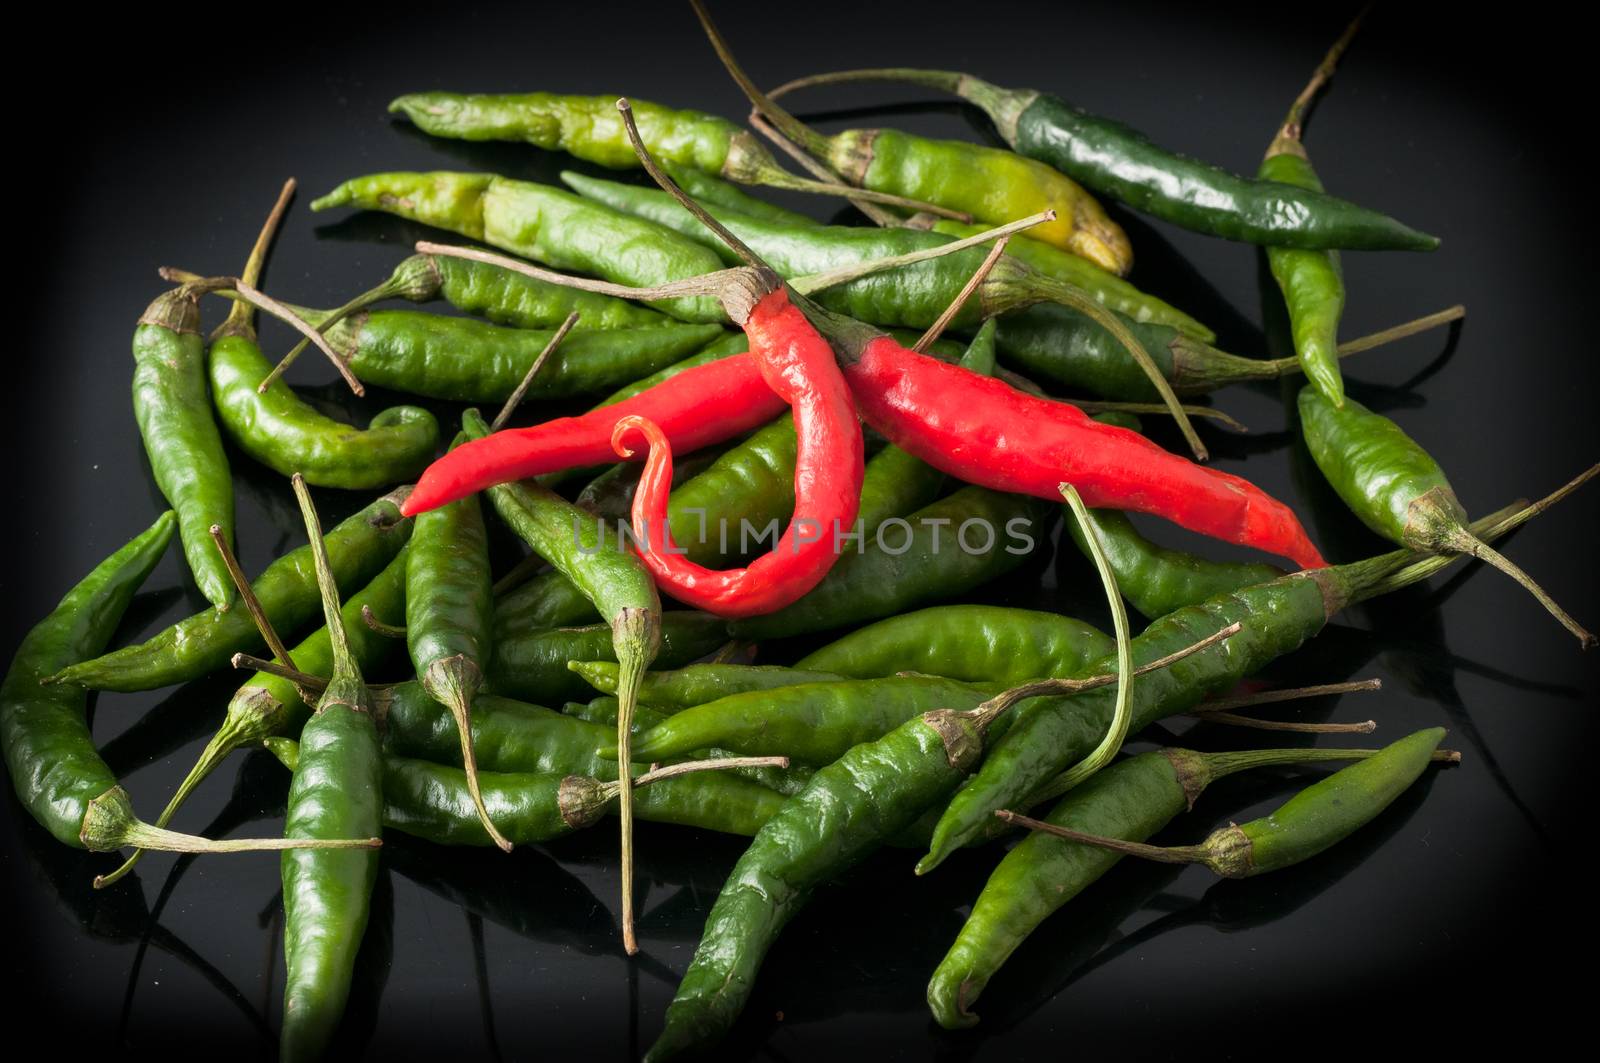 green chili peppers and red by antonio.li